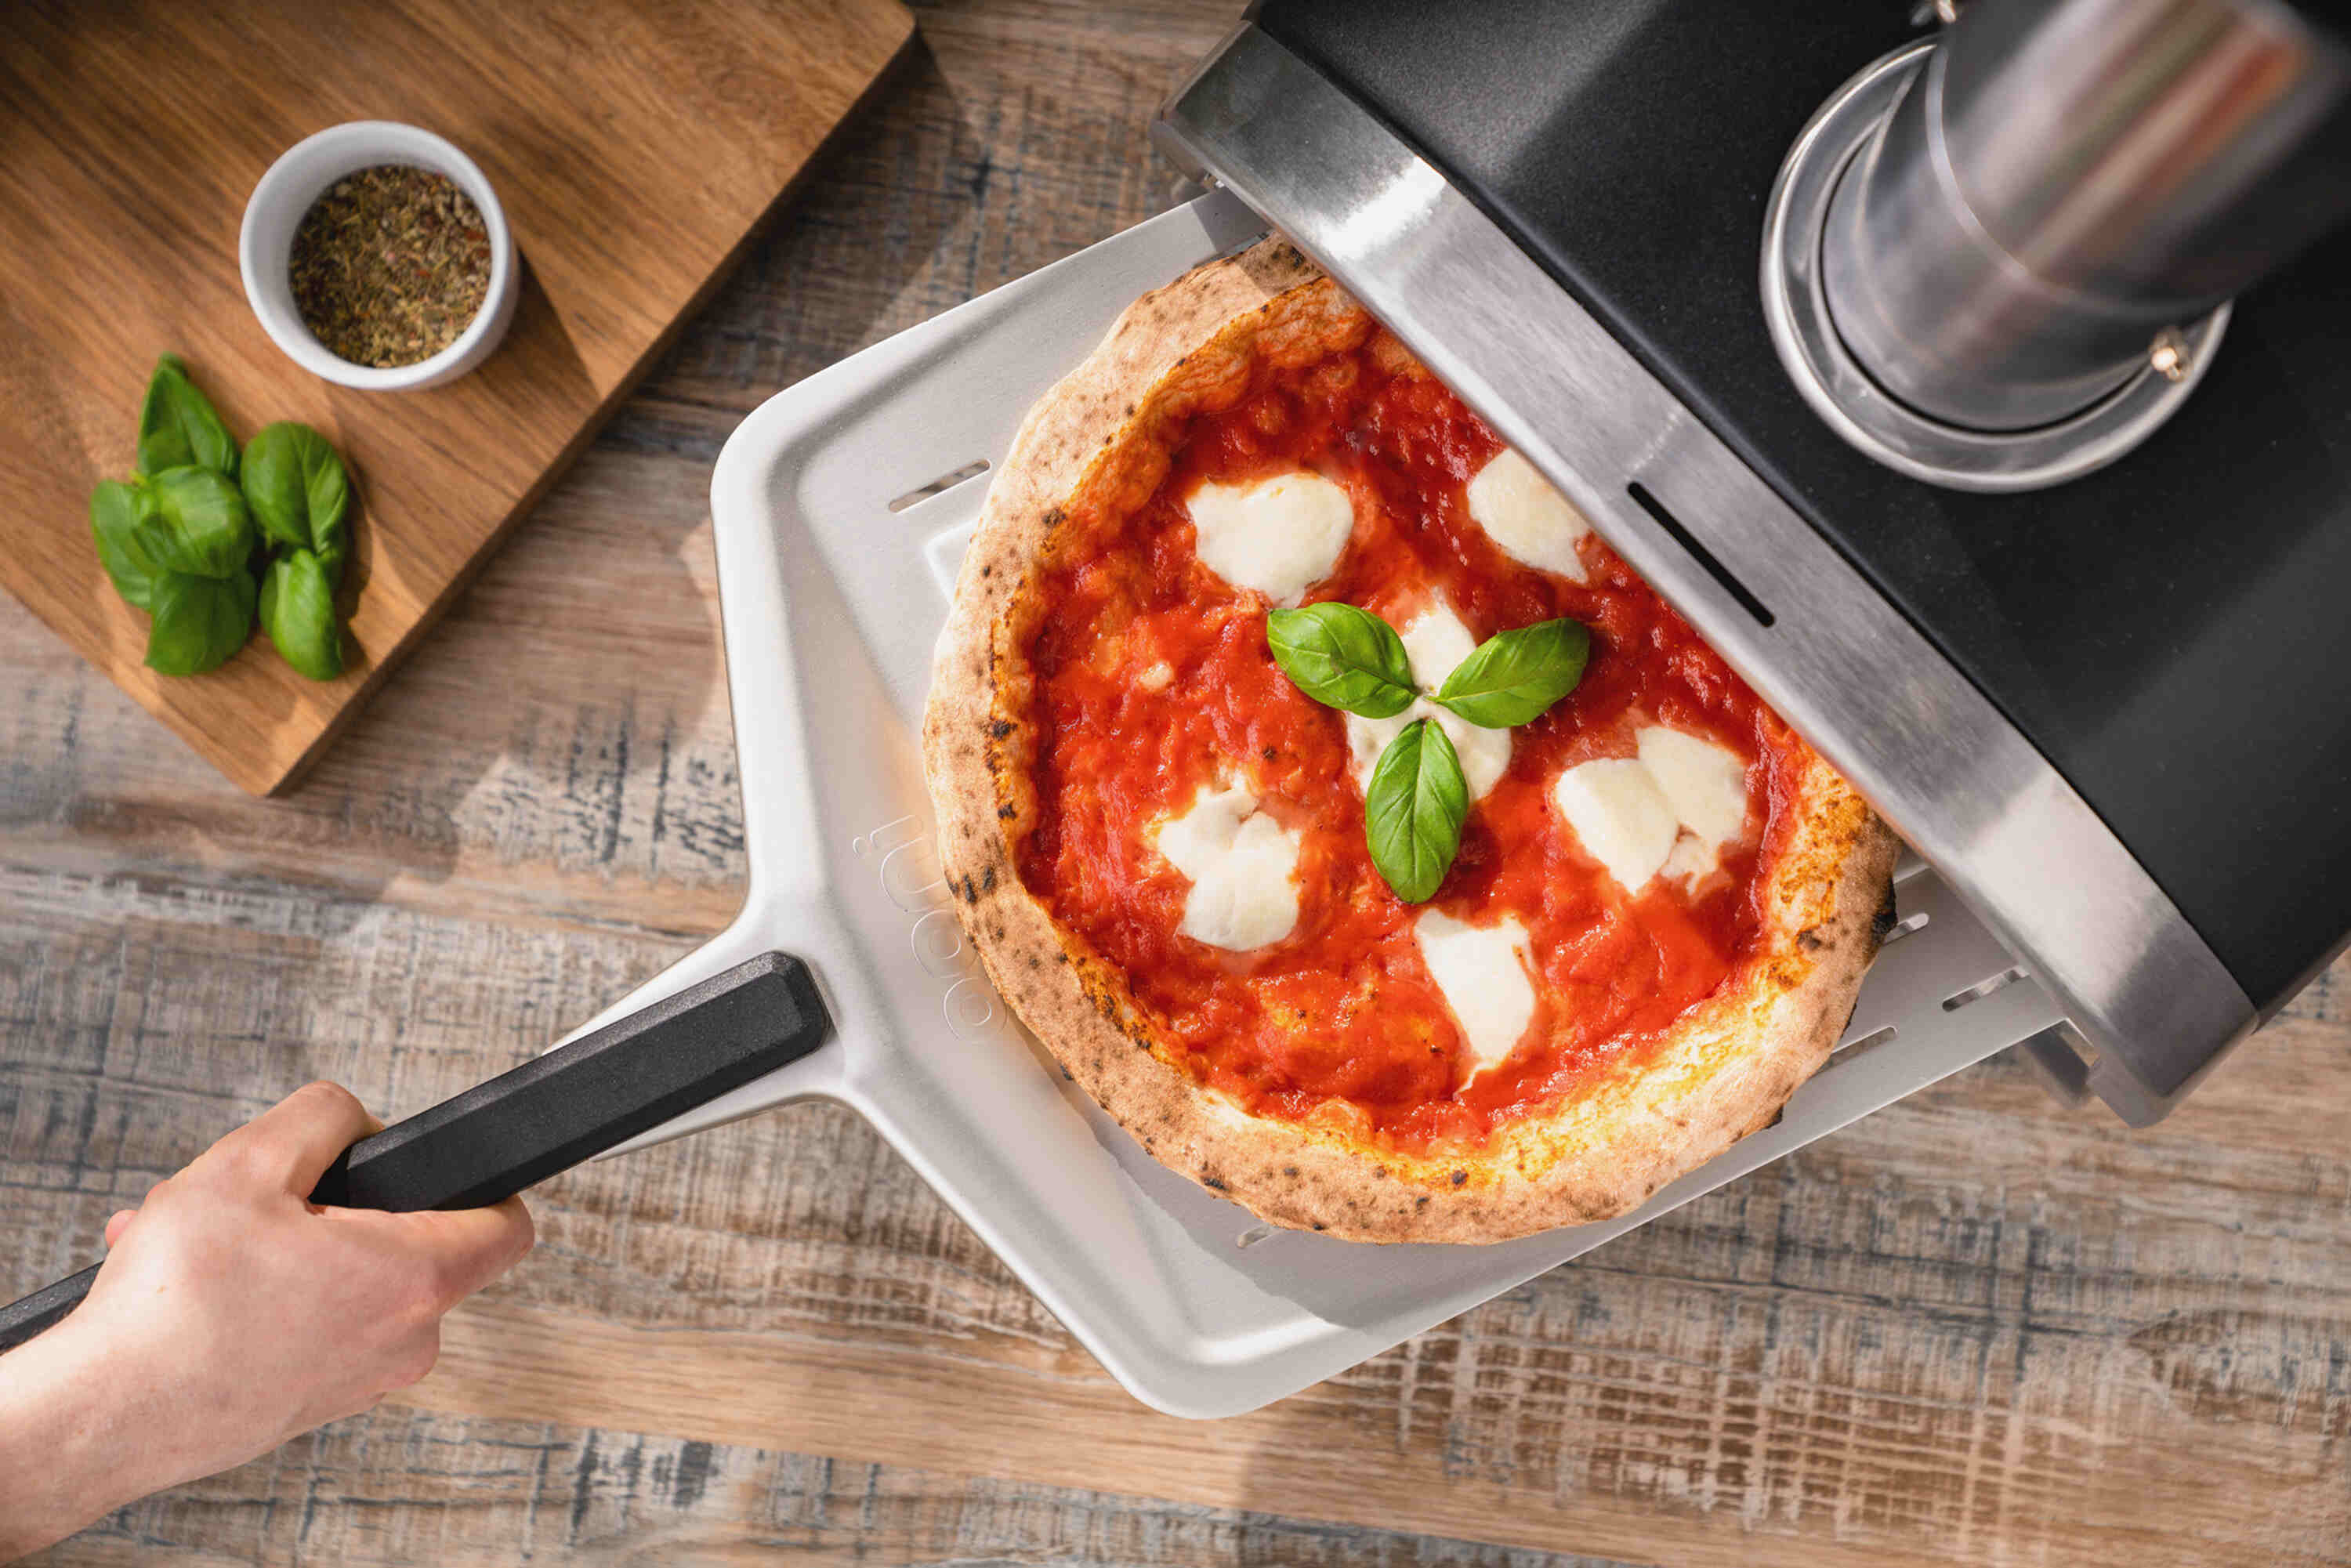  Courant Pizza Maker, 12 Inch Pizza Cooker and Calzone